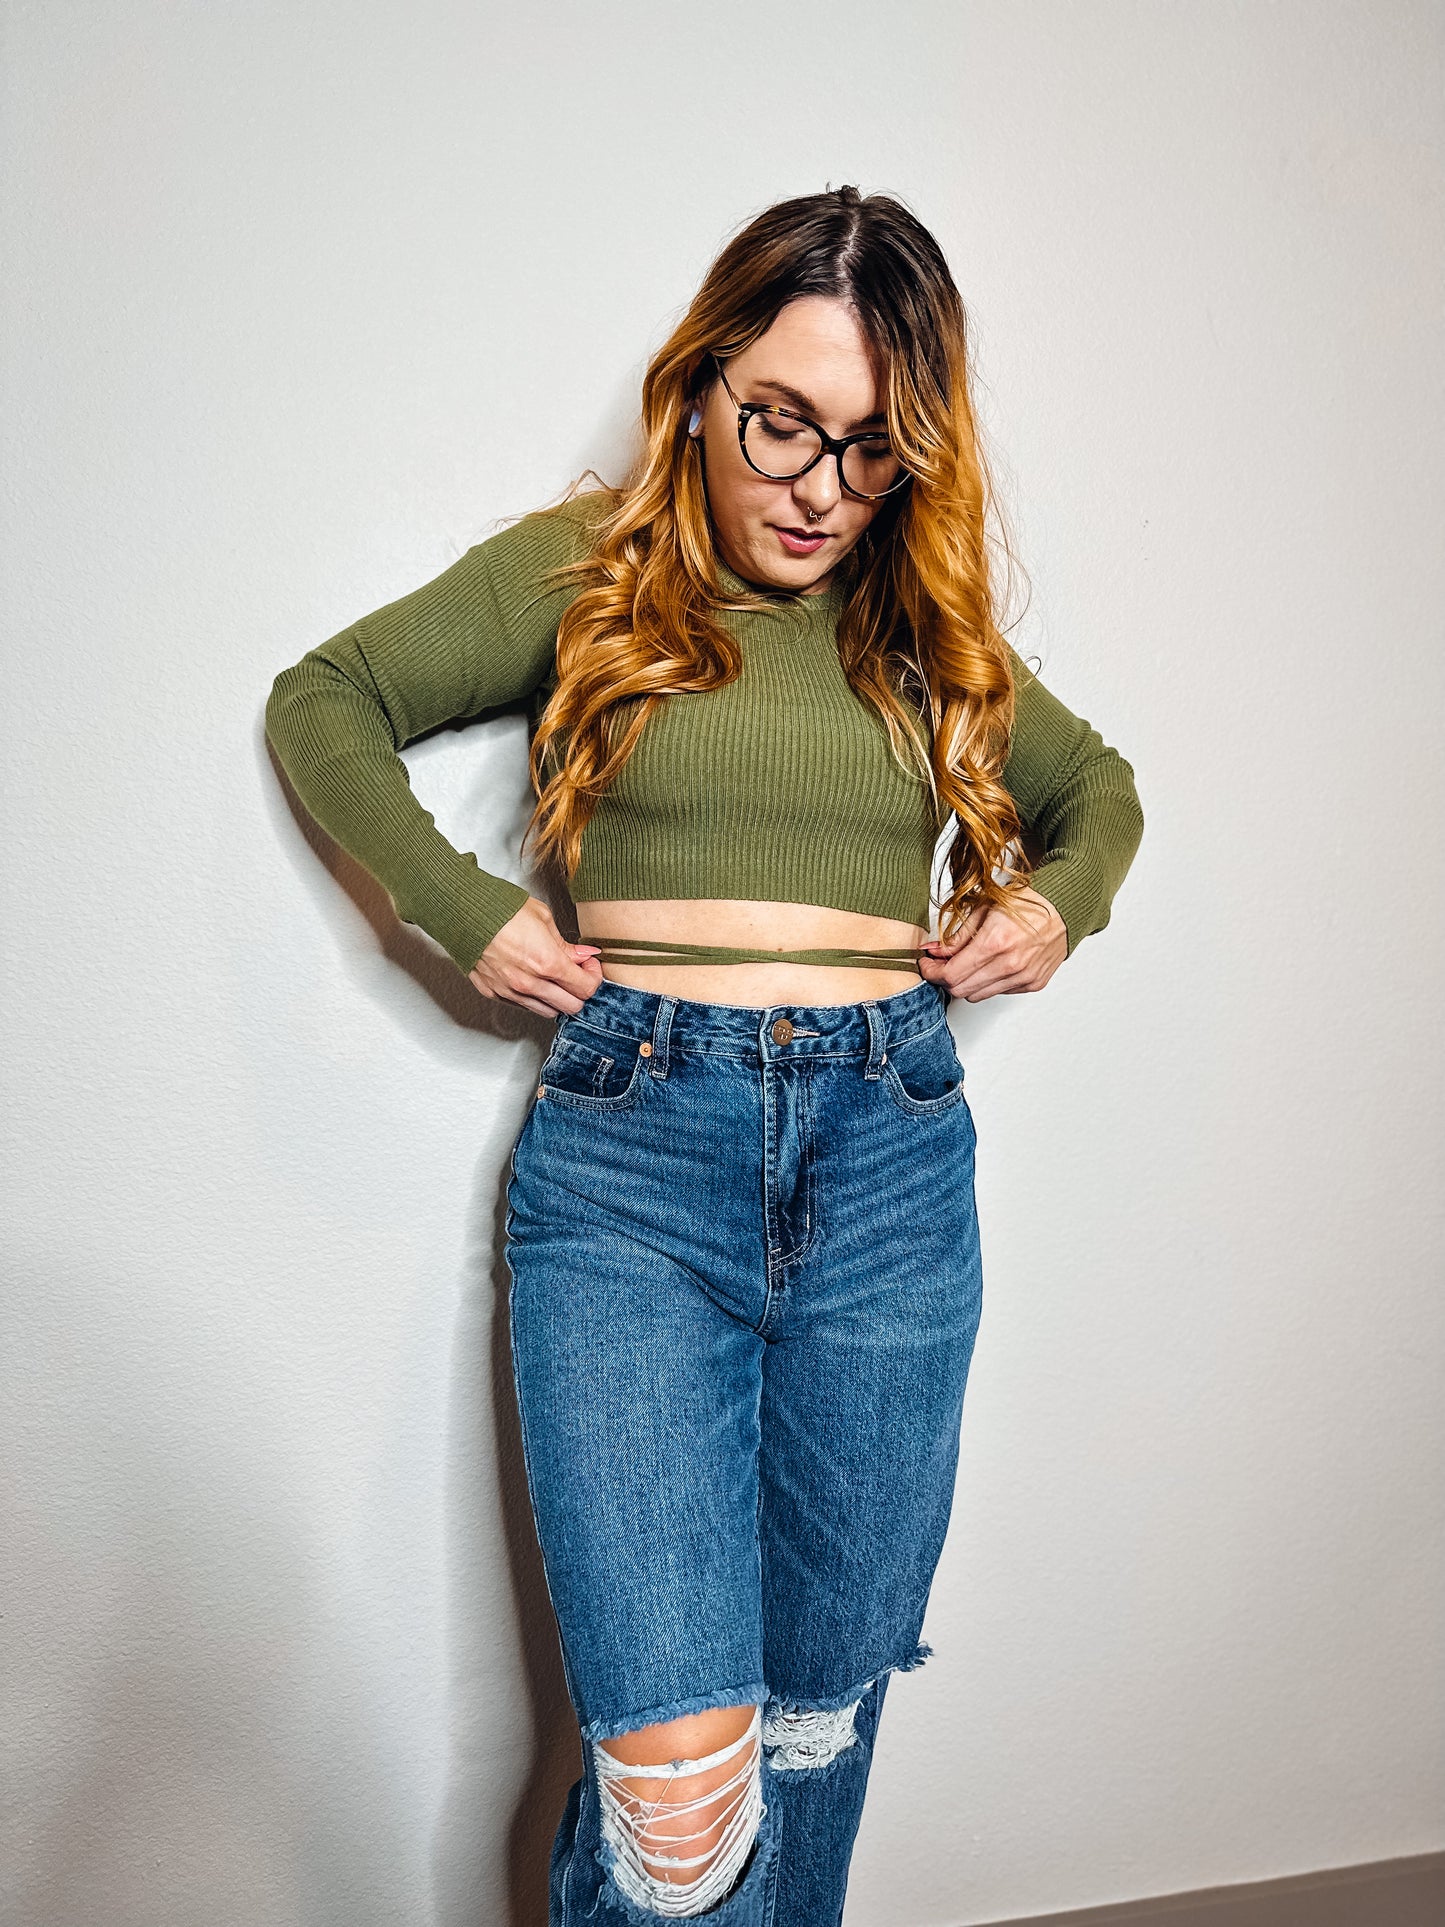 Olive Crossed Cropped Sweater